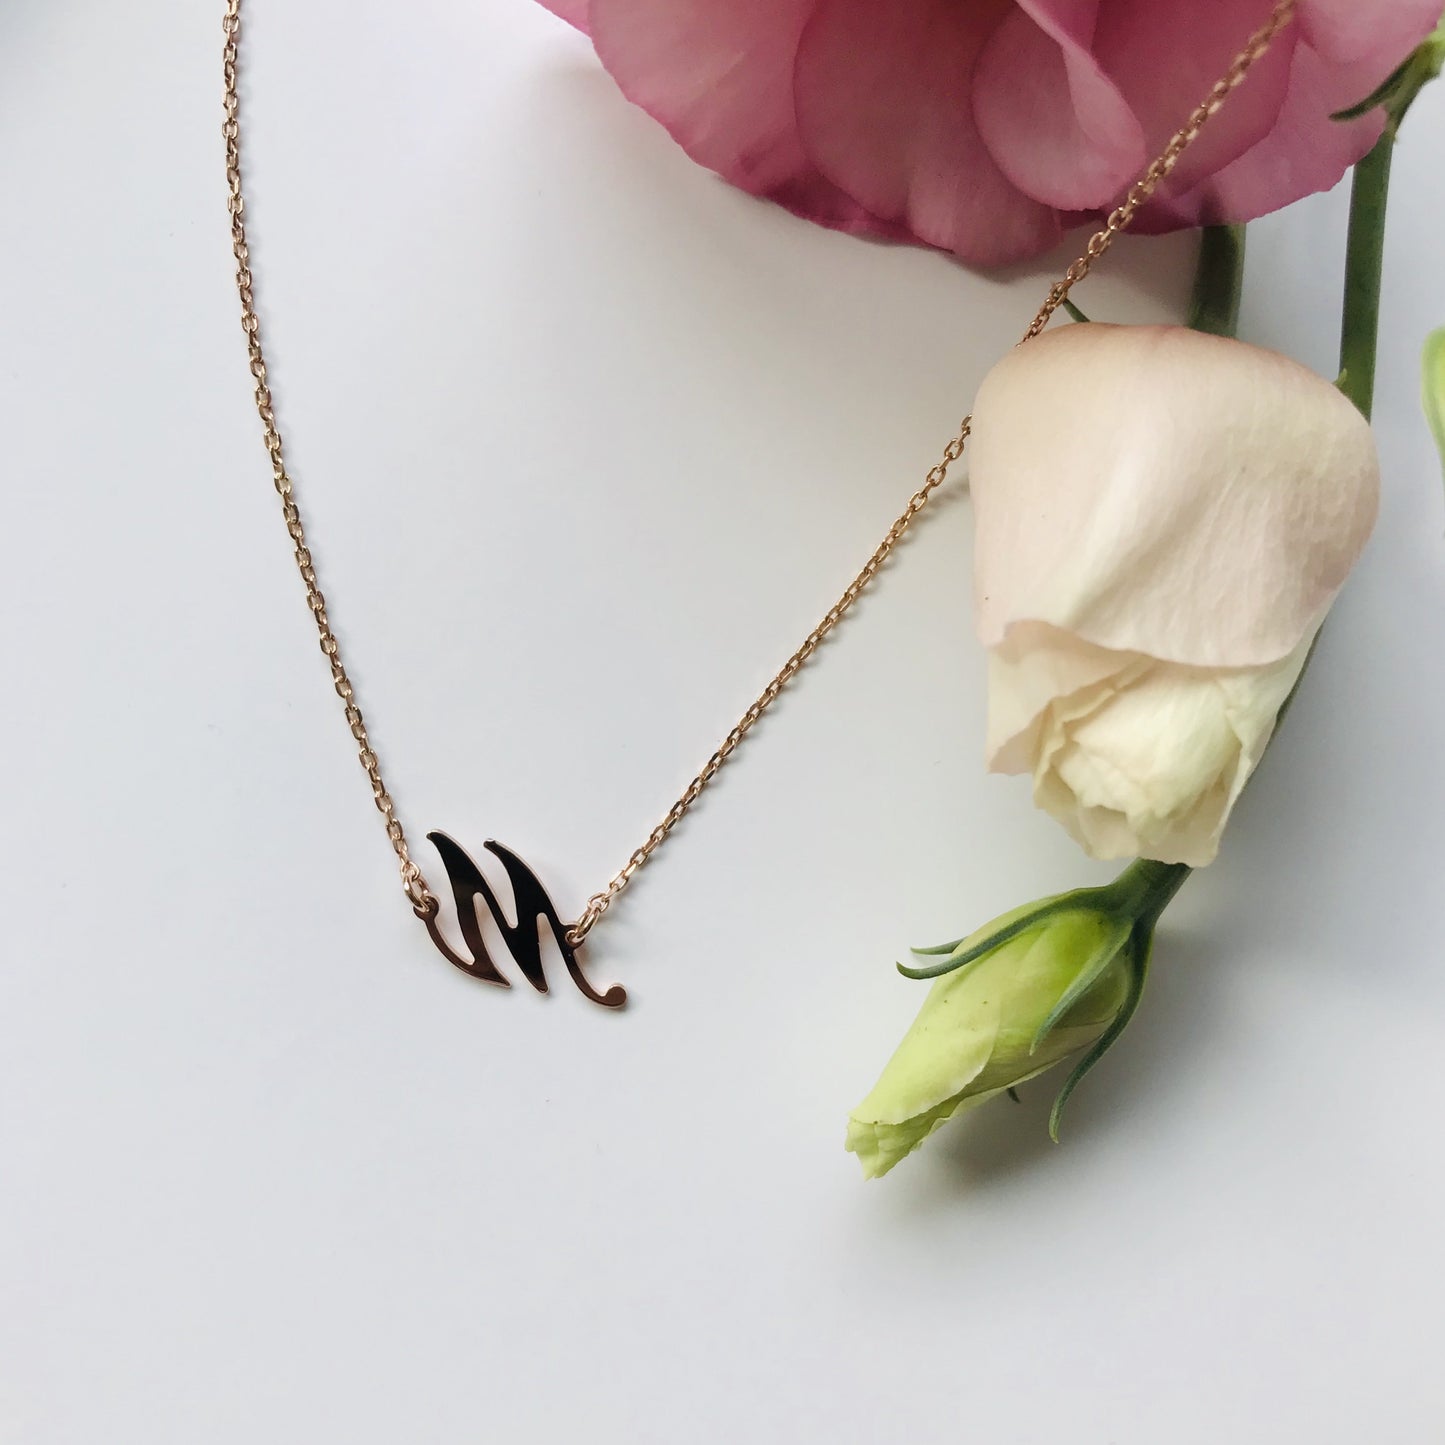 MY SMALL INITIAL necklace - BYVELA jewellery